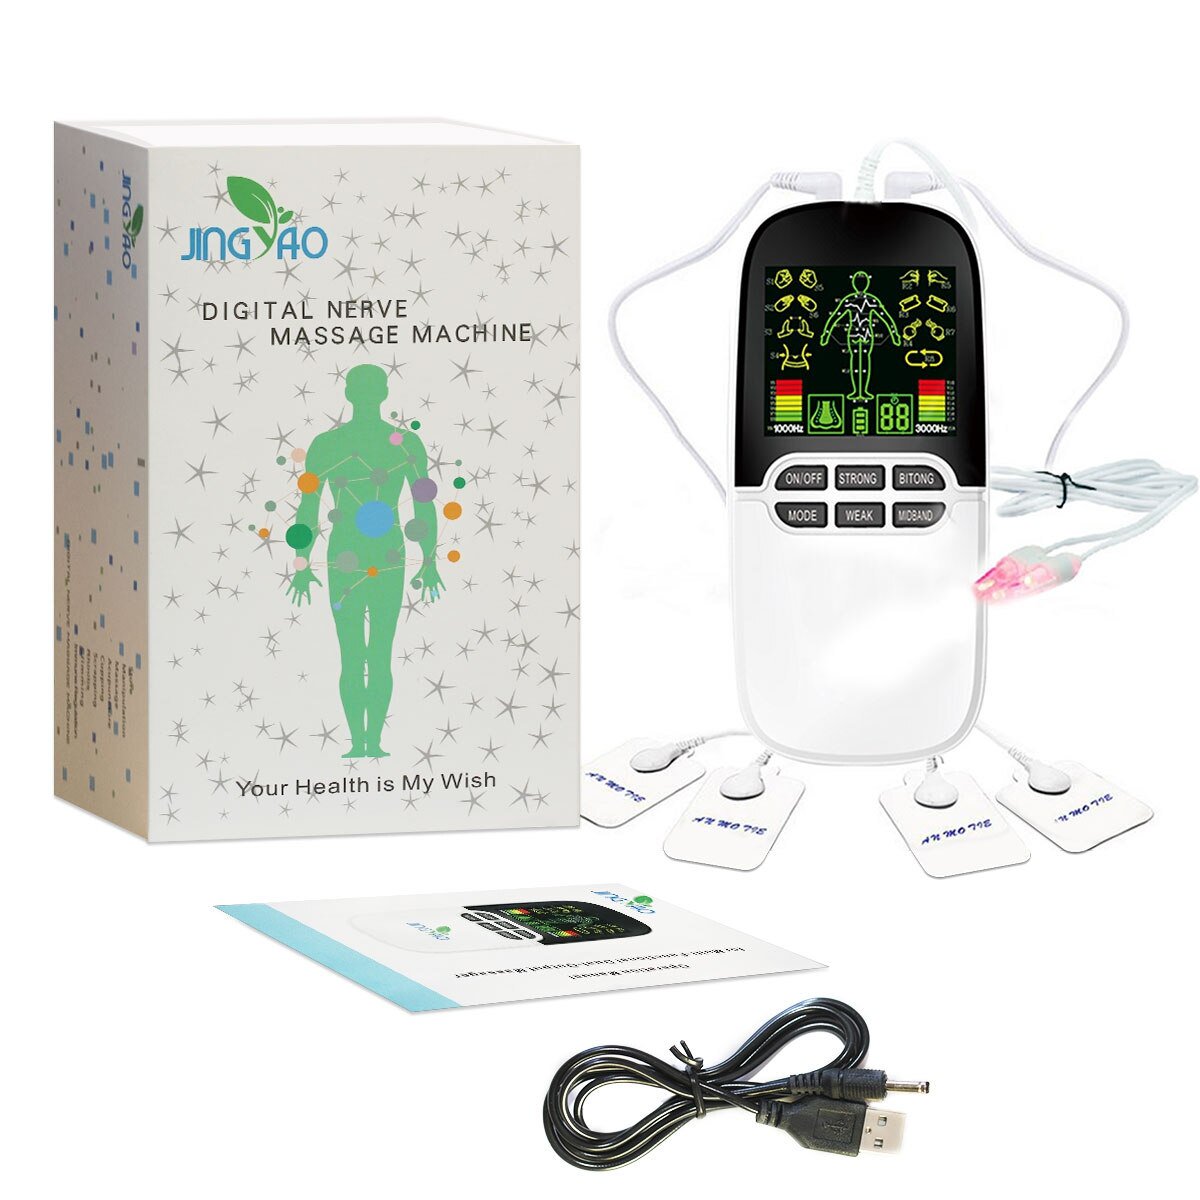 TENS Unit Muscle Stimulator for Pain Relief Therapy, Dual Channels Electronic Pulse Massager EMS Deivce with 4 Electrode Pads